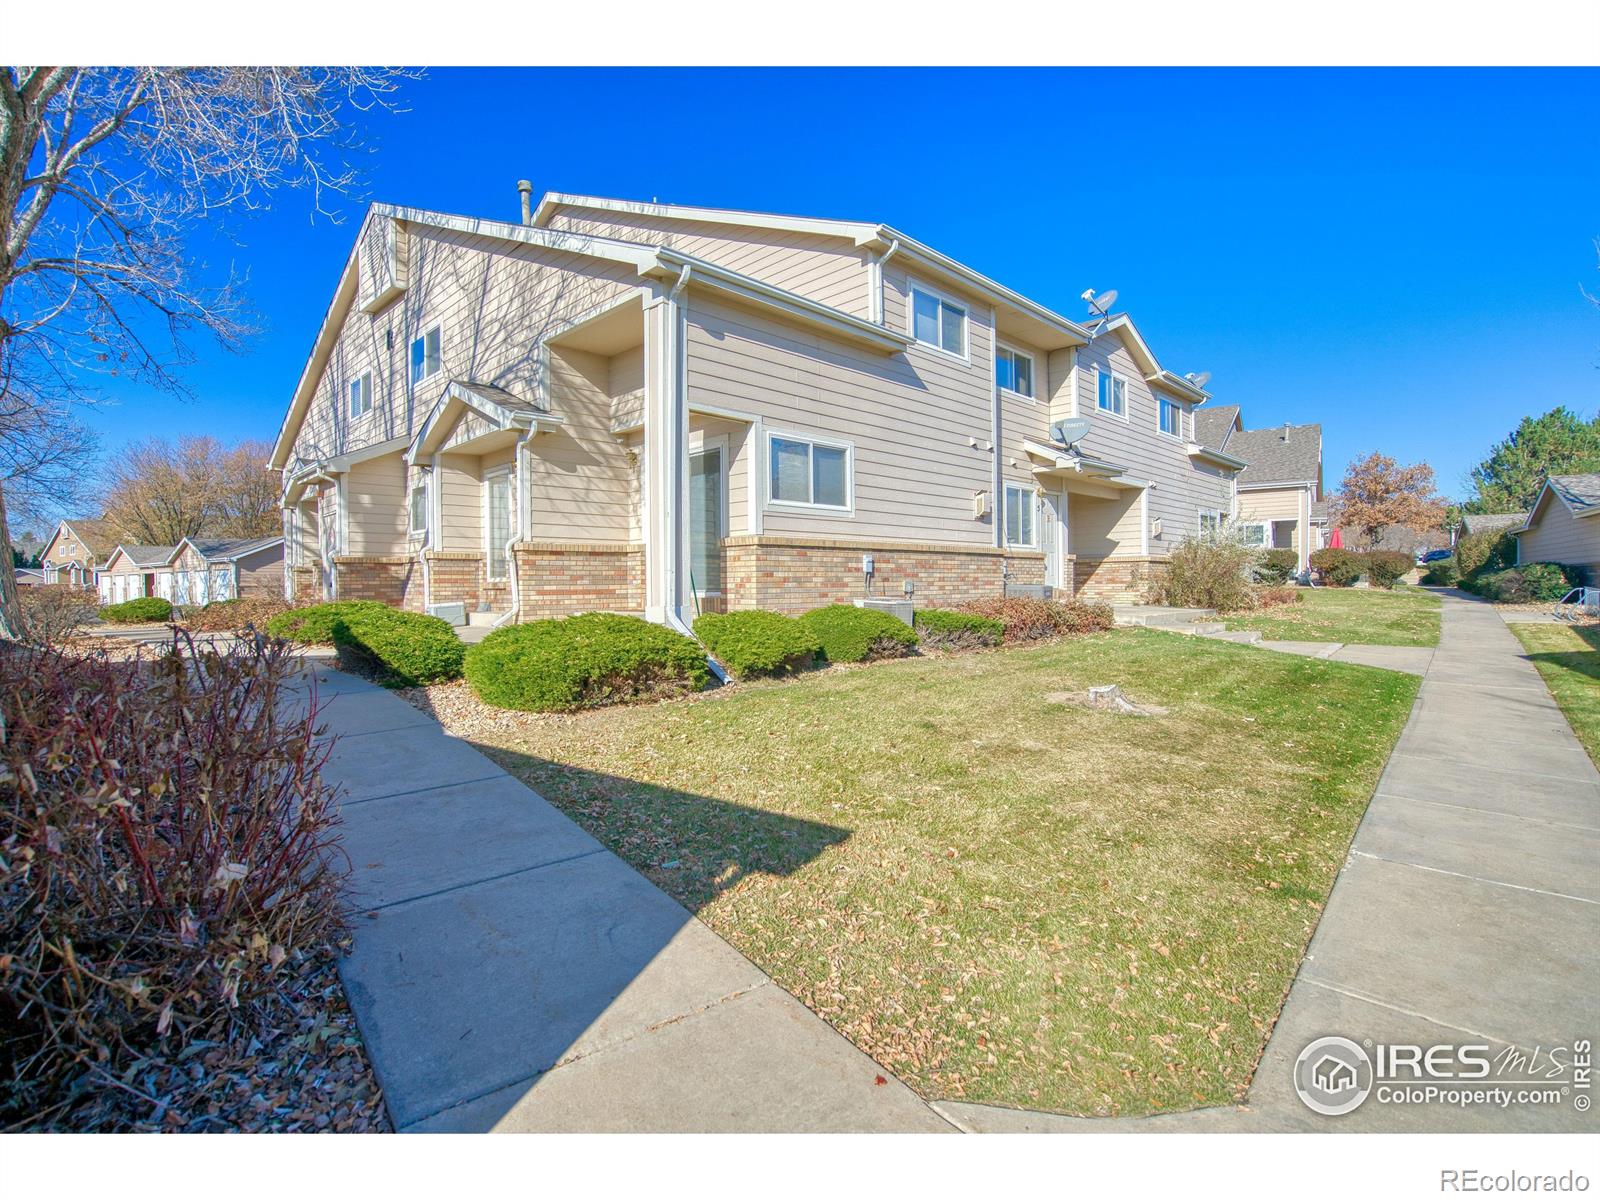 1601  great western drive, Longmont sold home. Closed on 2024-02-21 for $367,500.